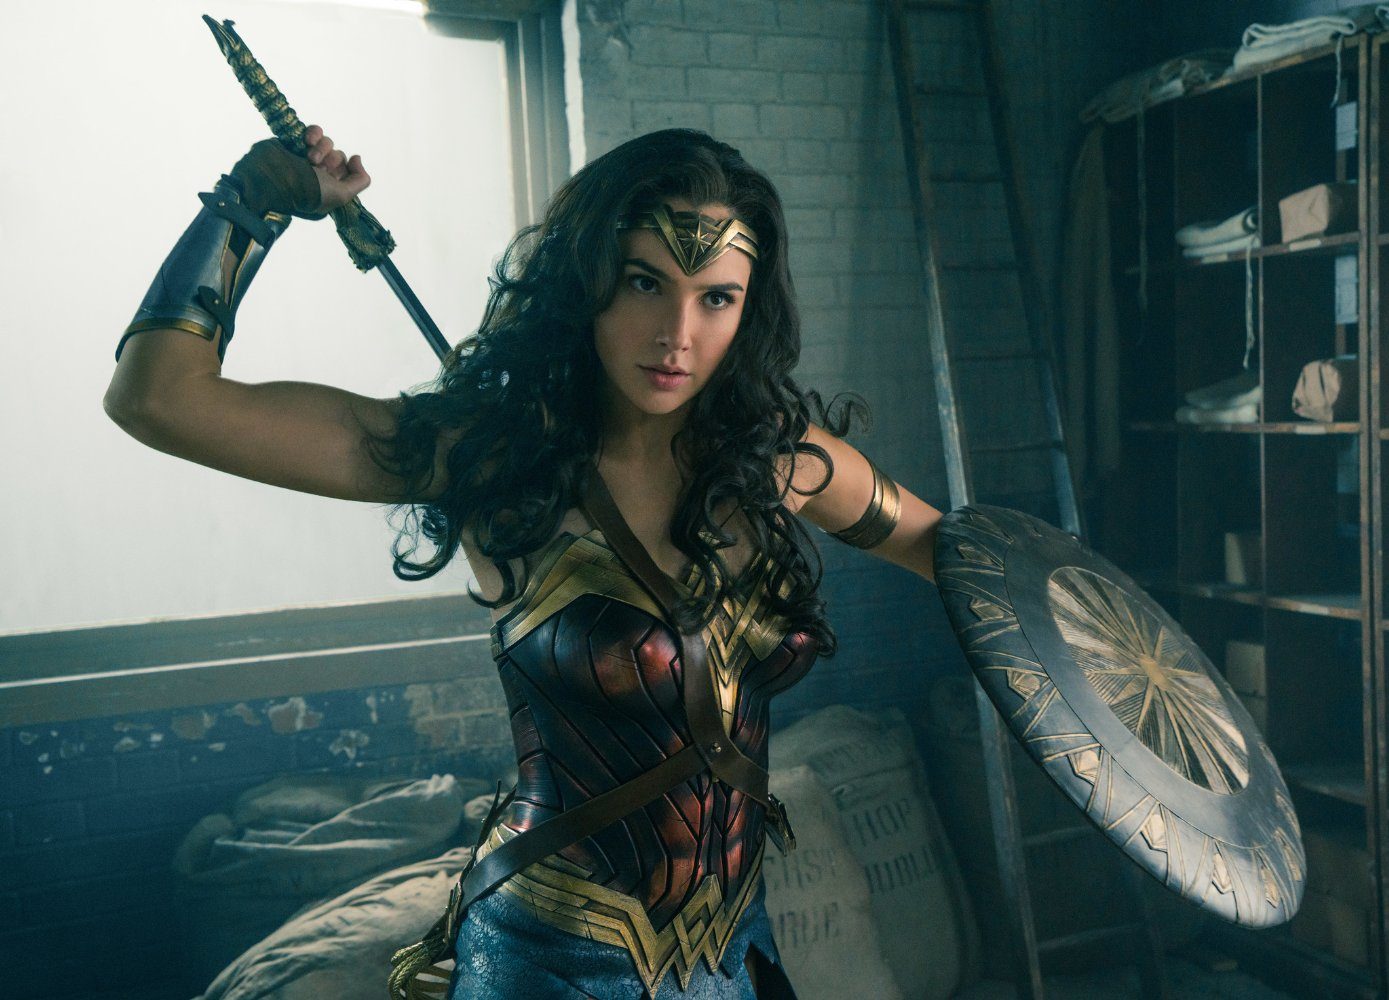 Reviving+feminism+in+film%3A+Why+Wonder+Woman+is+the+film+we+need+right+now